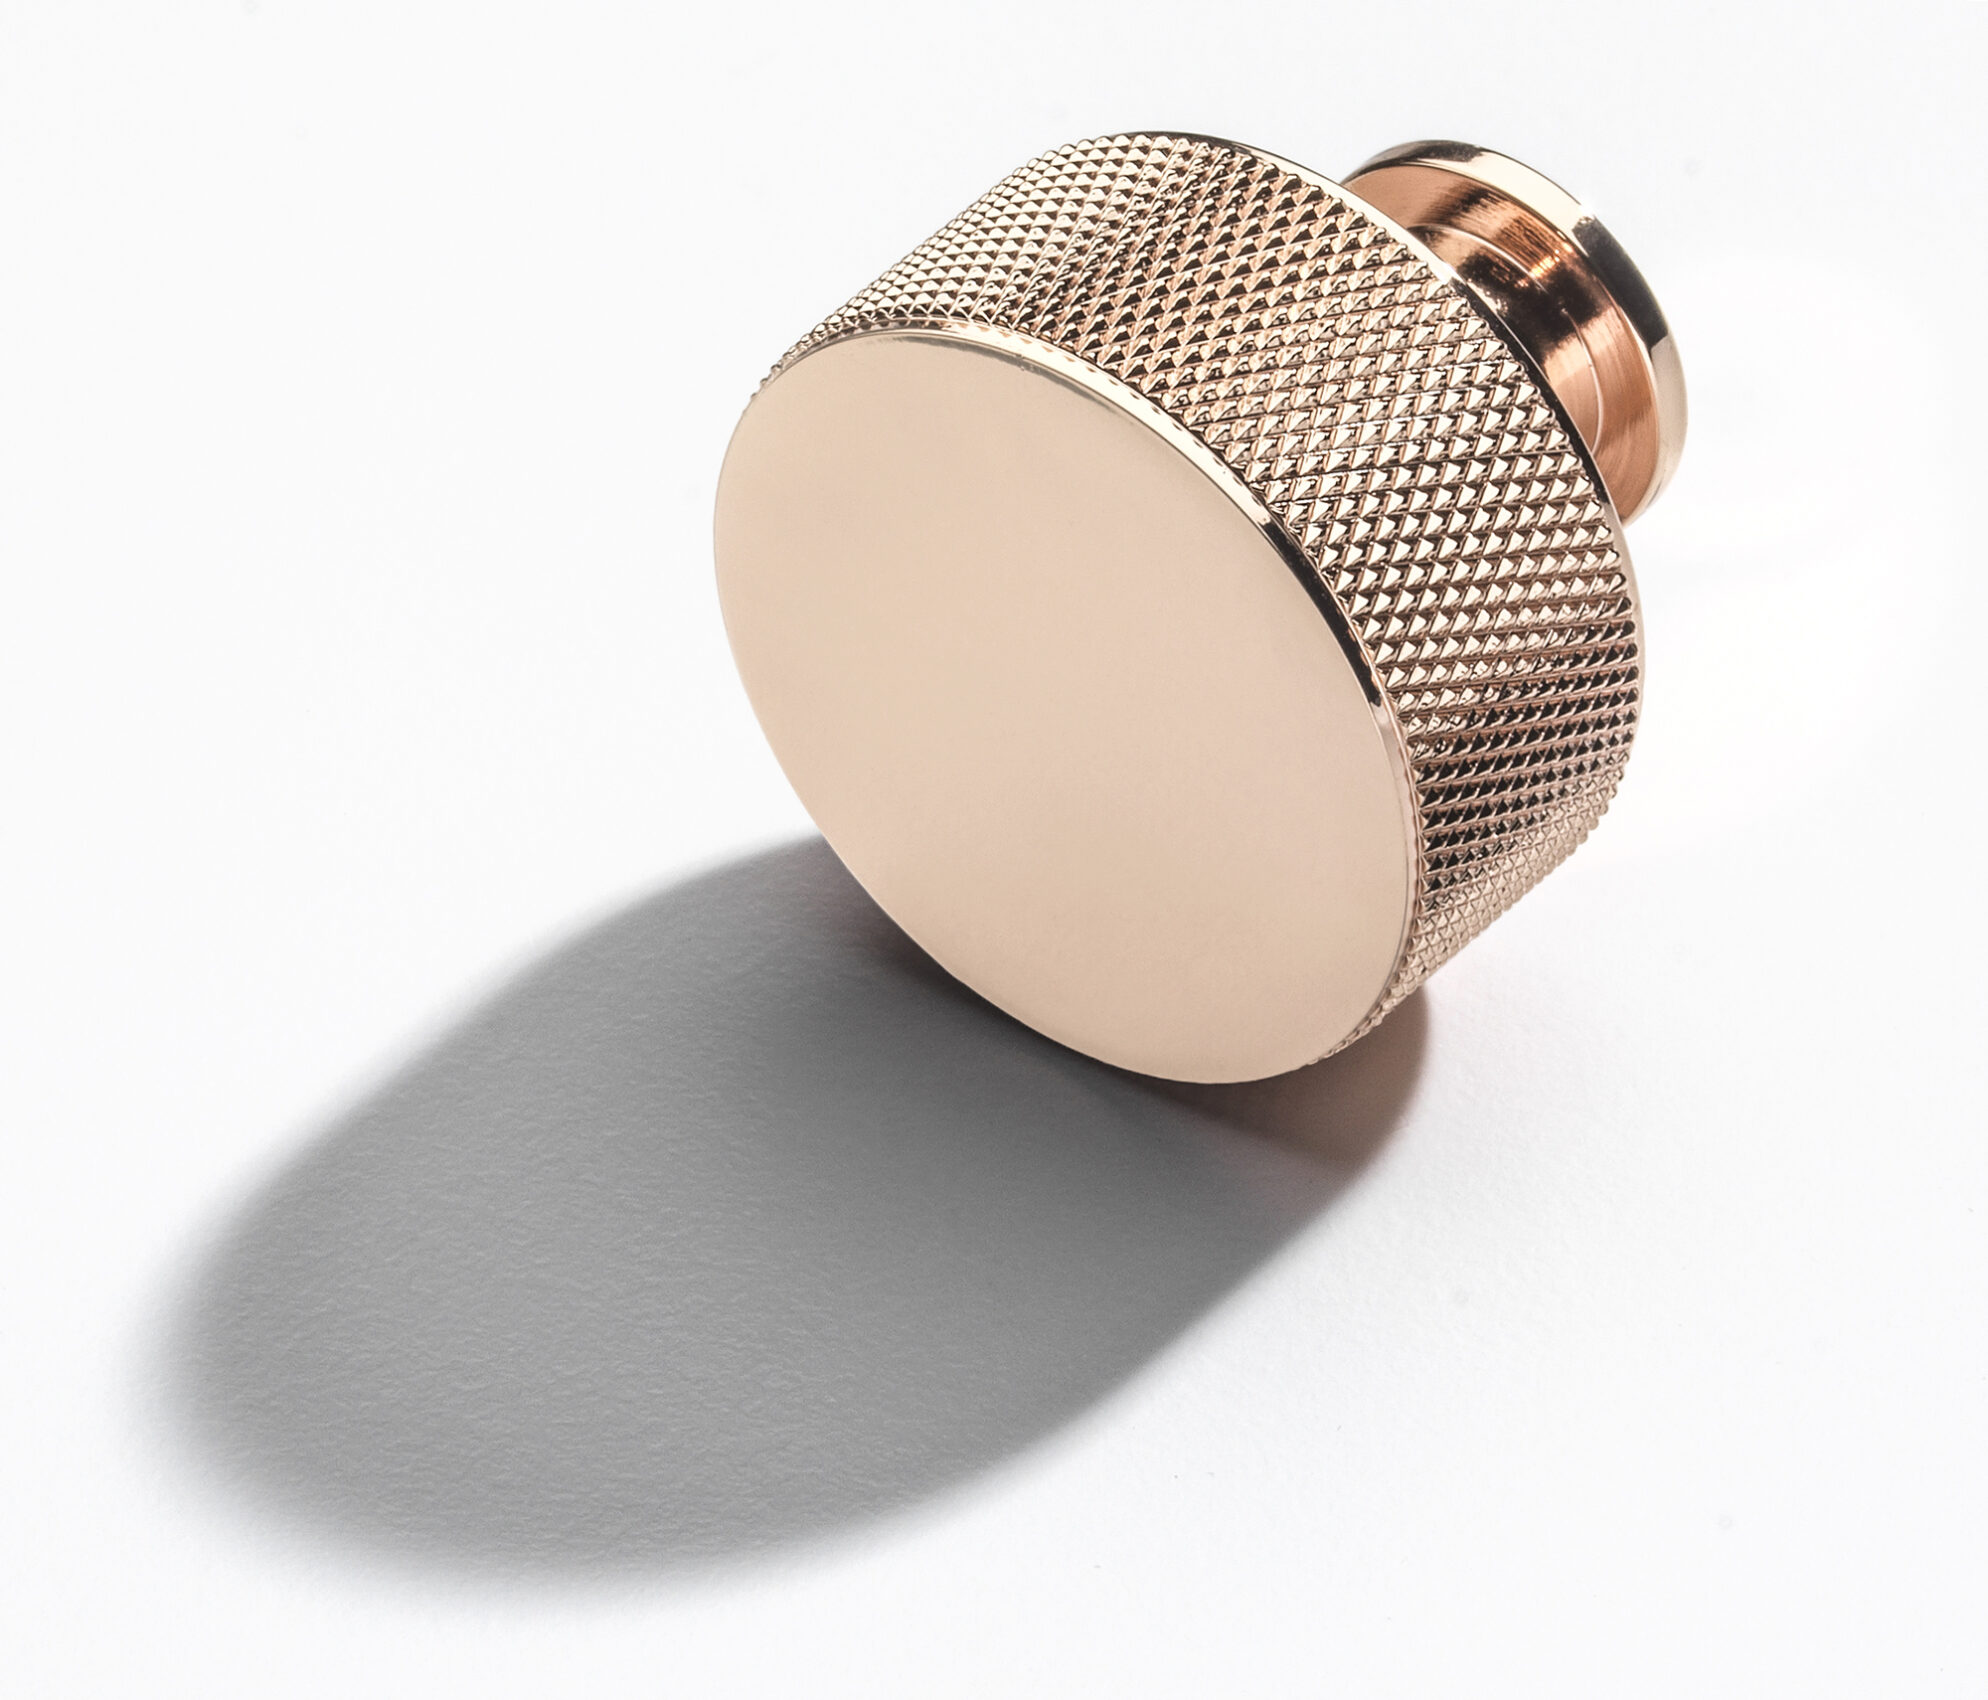 A Rose gold beautiful cabinet handle by Croft and Assinder showing detail and craftsmanship with fantastic colouring